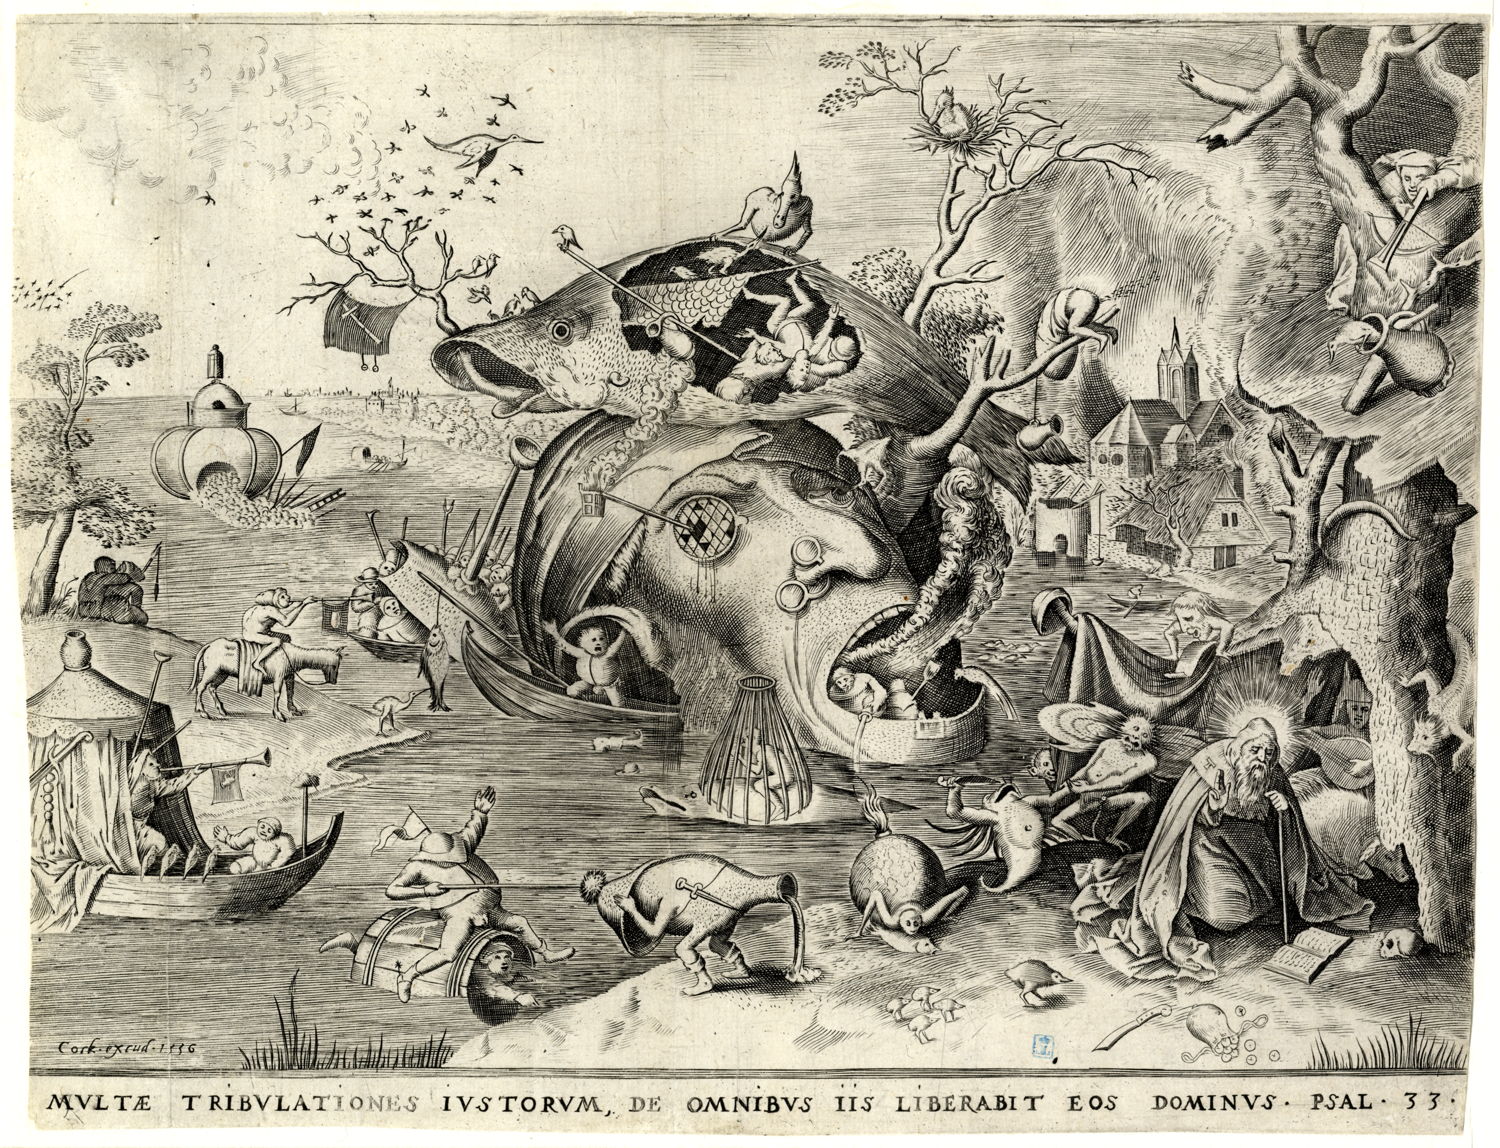 Hieronymus Cock after Pieter I Bruegel, The Temptation of Saint Anthony, 1556 © KBR